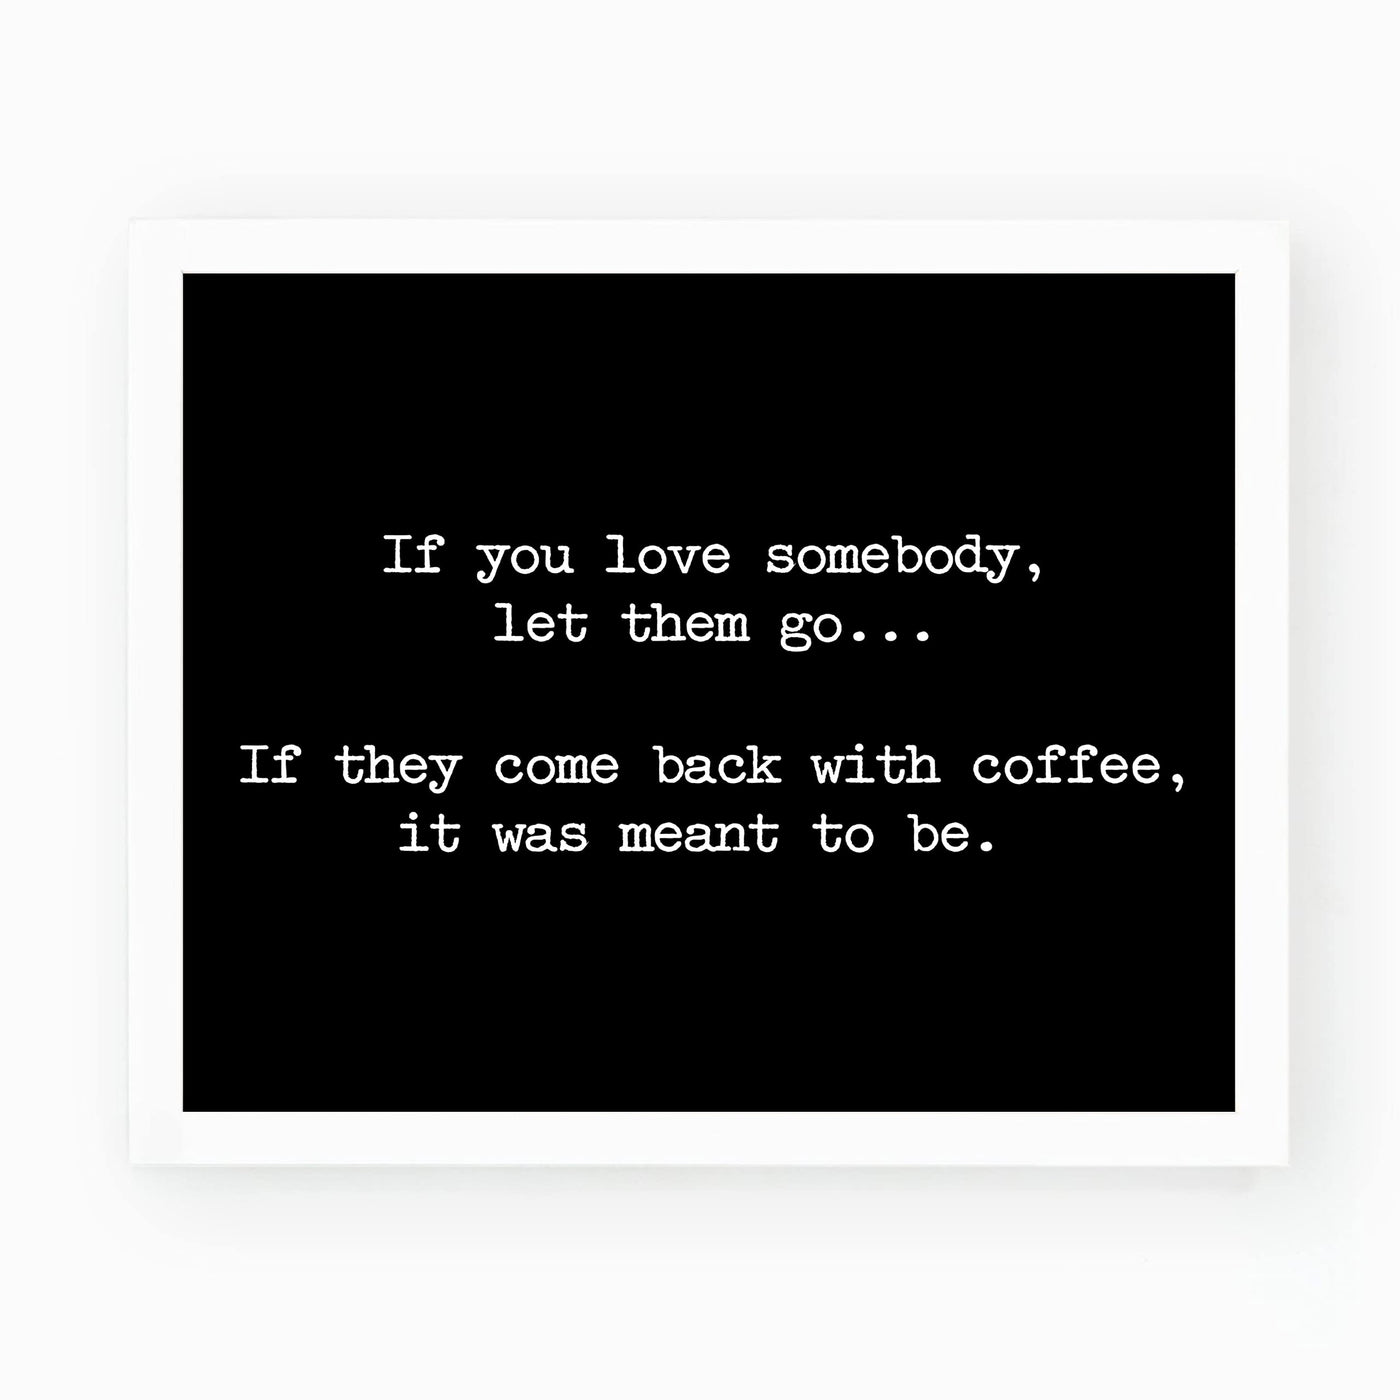 If They Come Back With Coffee-Was Meant To Be Funny Coffee Wall Sign -10 x 8" Typographic Art Print-Ready to Frame. Humorous Home-Kitchen-Office-Cafe-Restaurant Decor. Fun Gift for Coffee Lovers!